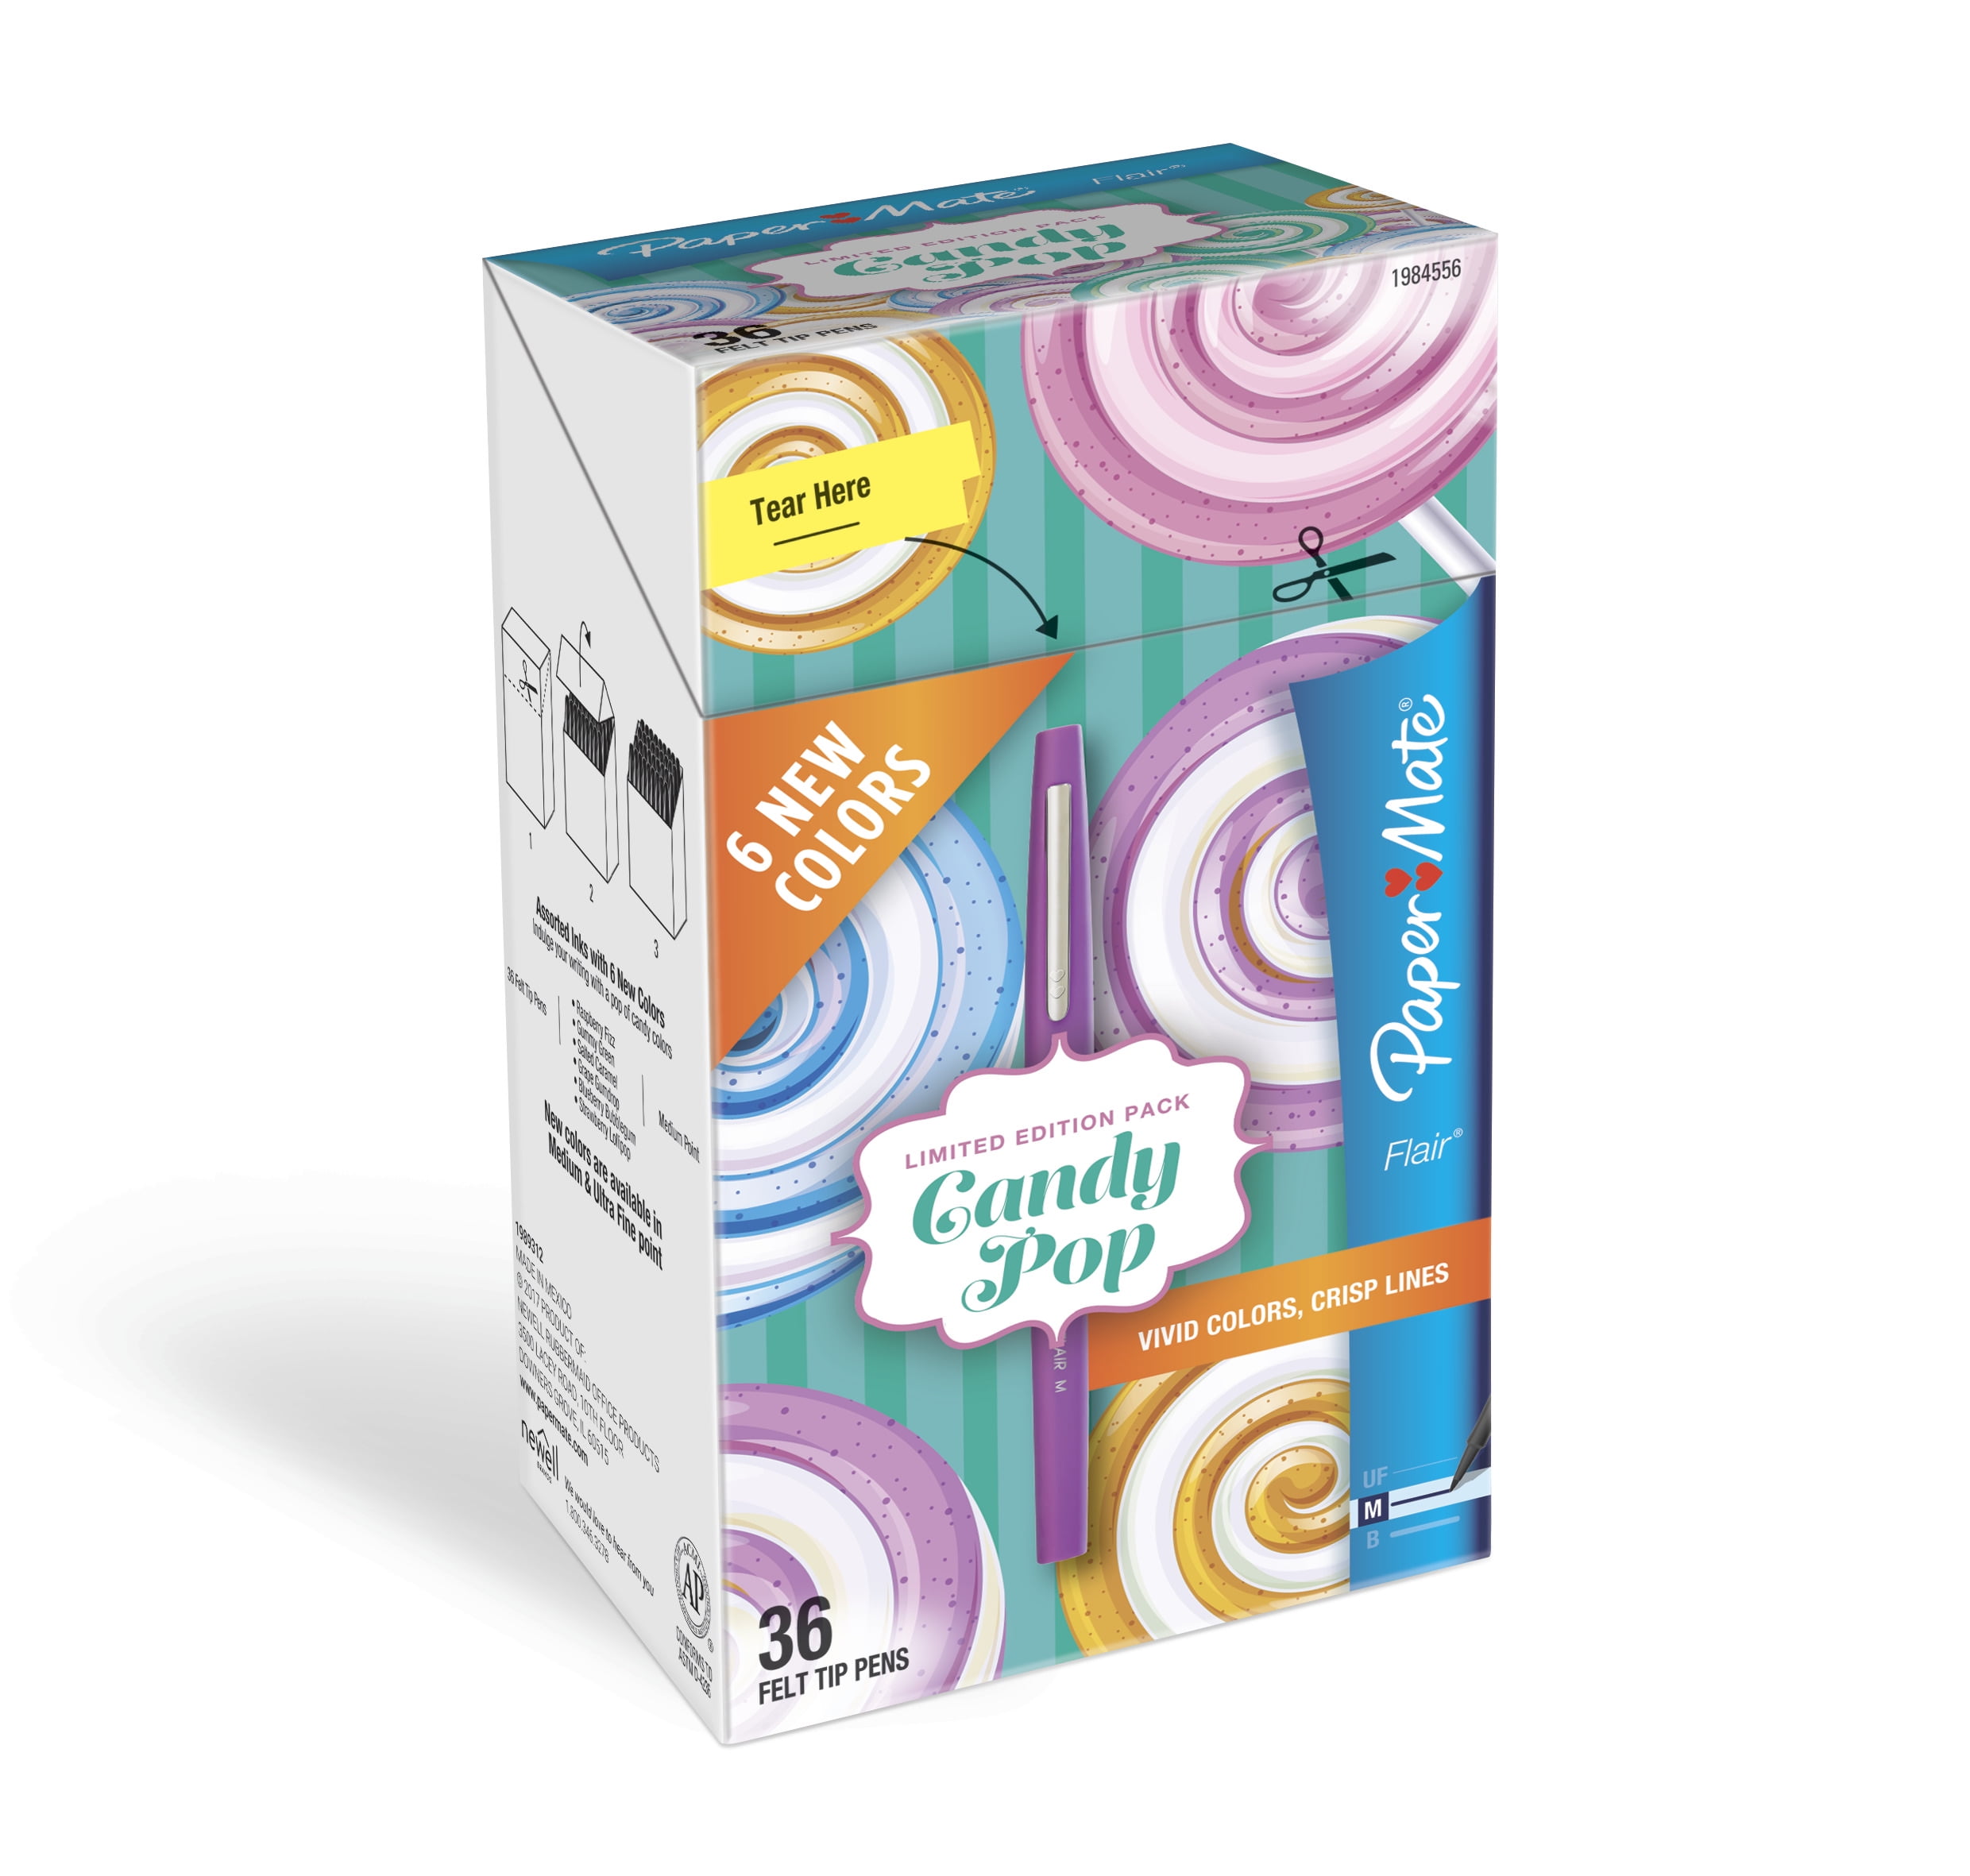 Limited Edition Candy Pop Pack Paper Mate Flair Felt Tip Pens Box of 36-1 Pack Medium Point 